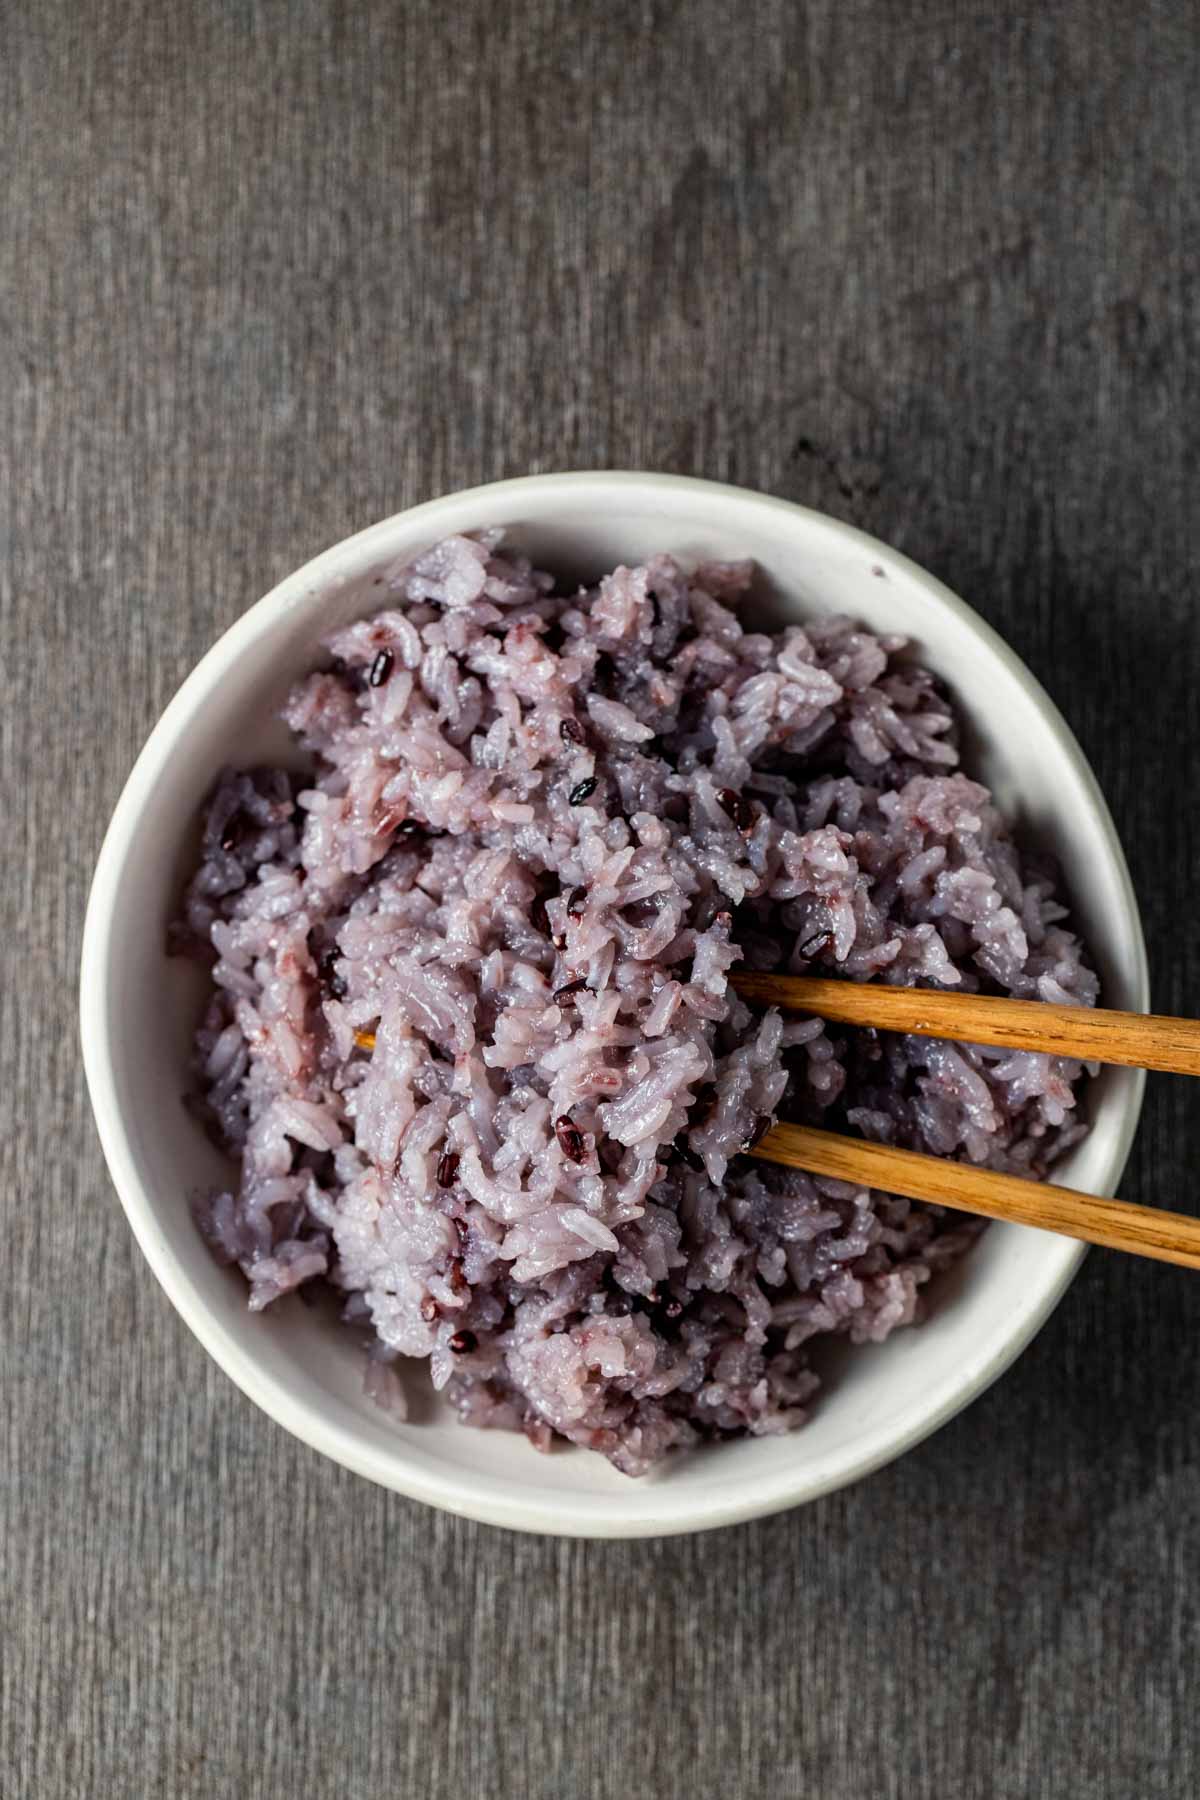 Overhead view of purple rice in a bowl with chopsticks inserted into it.